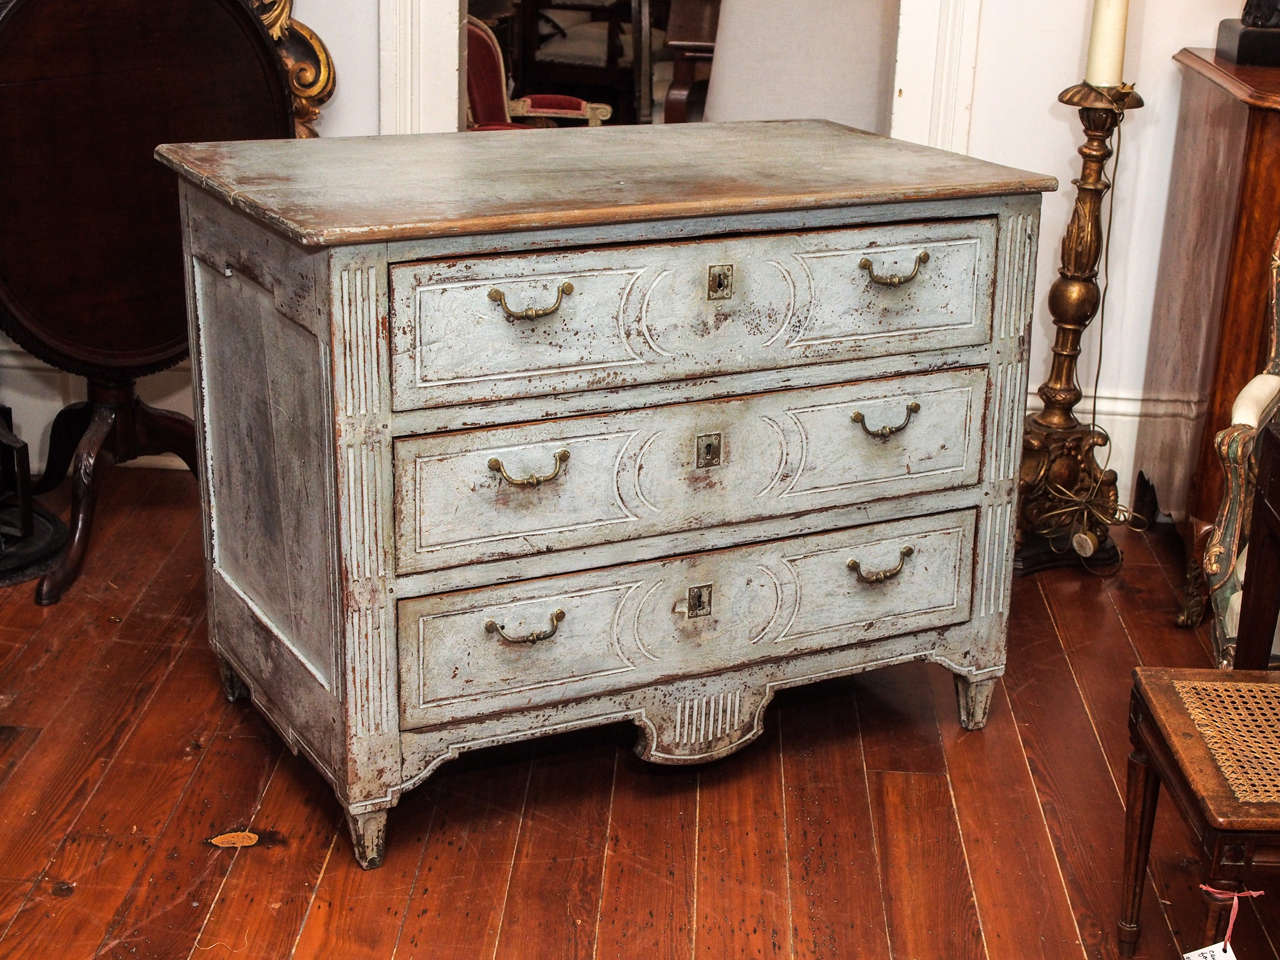 A period walnut 18c. commode with three drawers, with fluted side rails and tapered feet, the bottom with a deep, molded apron.  Pulls replaced, paint not original.